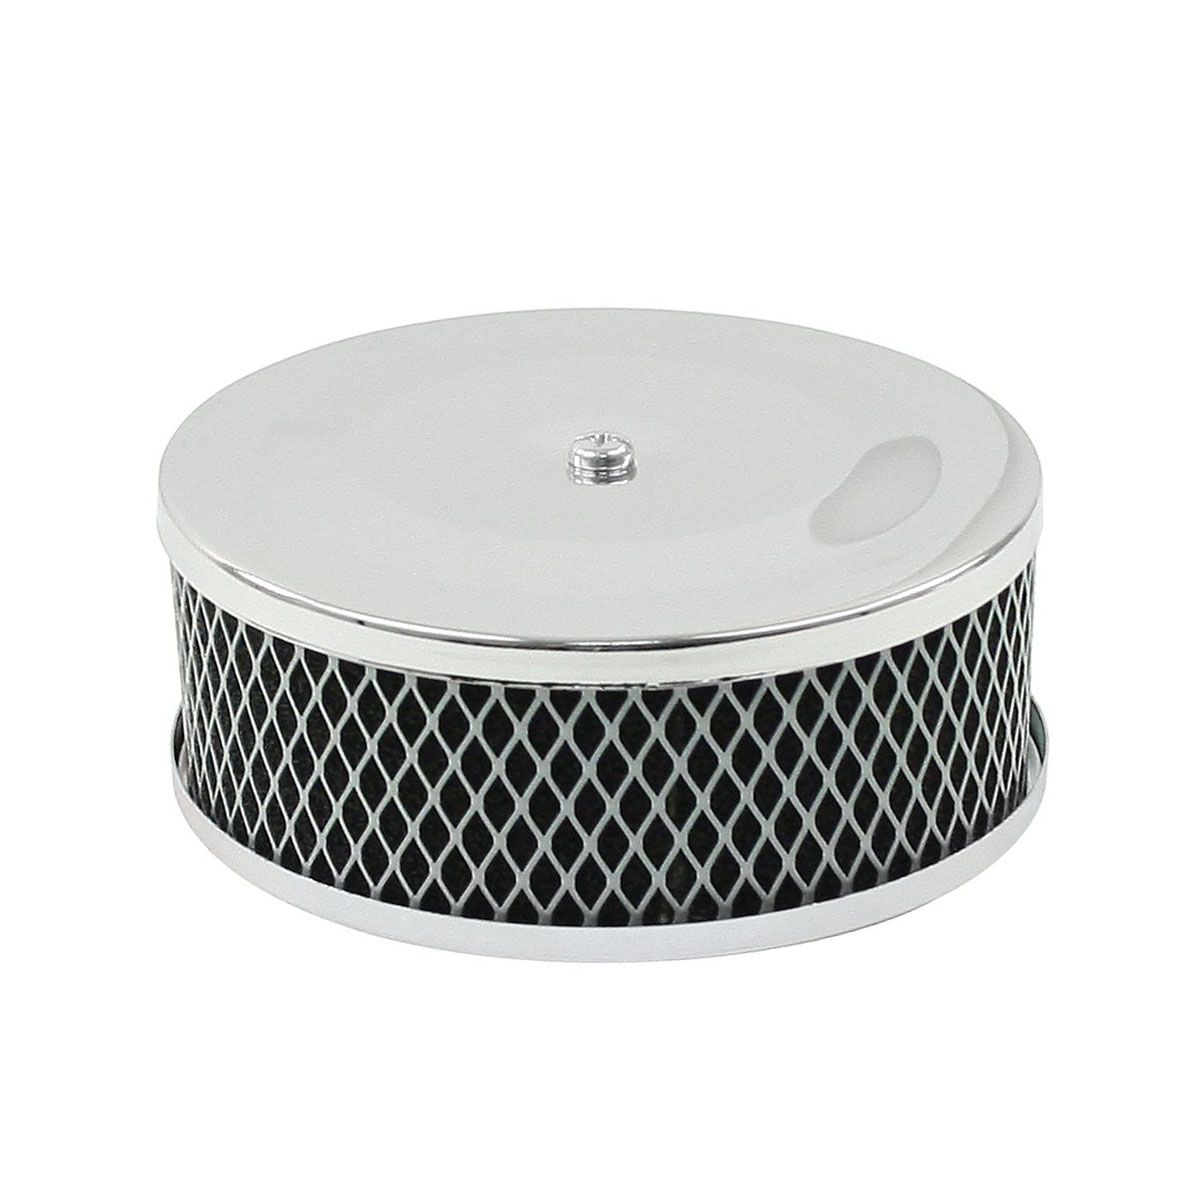 VW Air Cleaner - High Profile - High Flow - for VW Stock Carb - 5 1/2" - 2 3/4" High - Foam Element